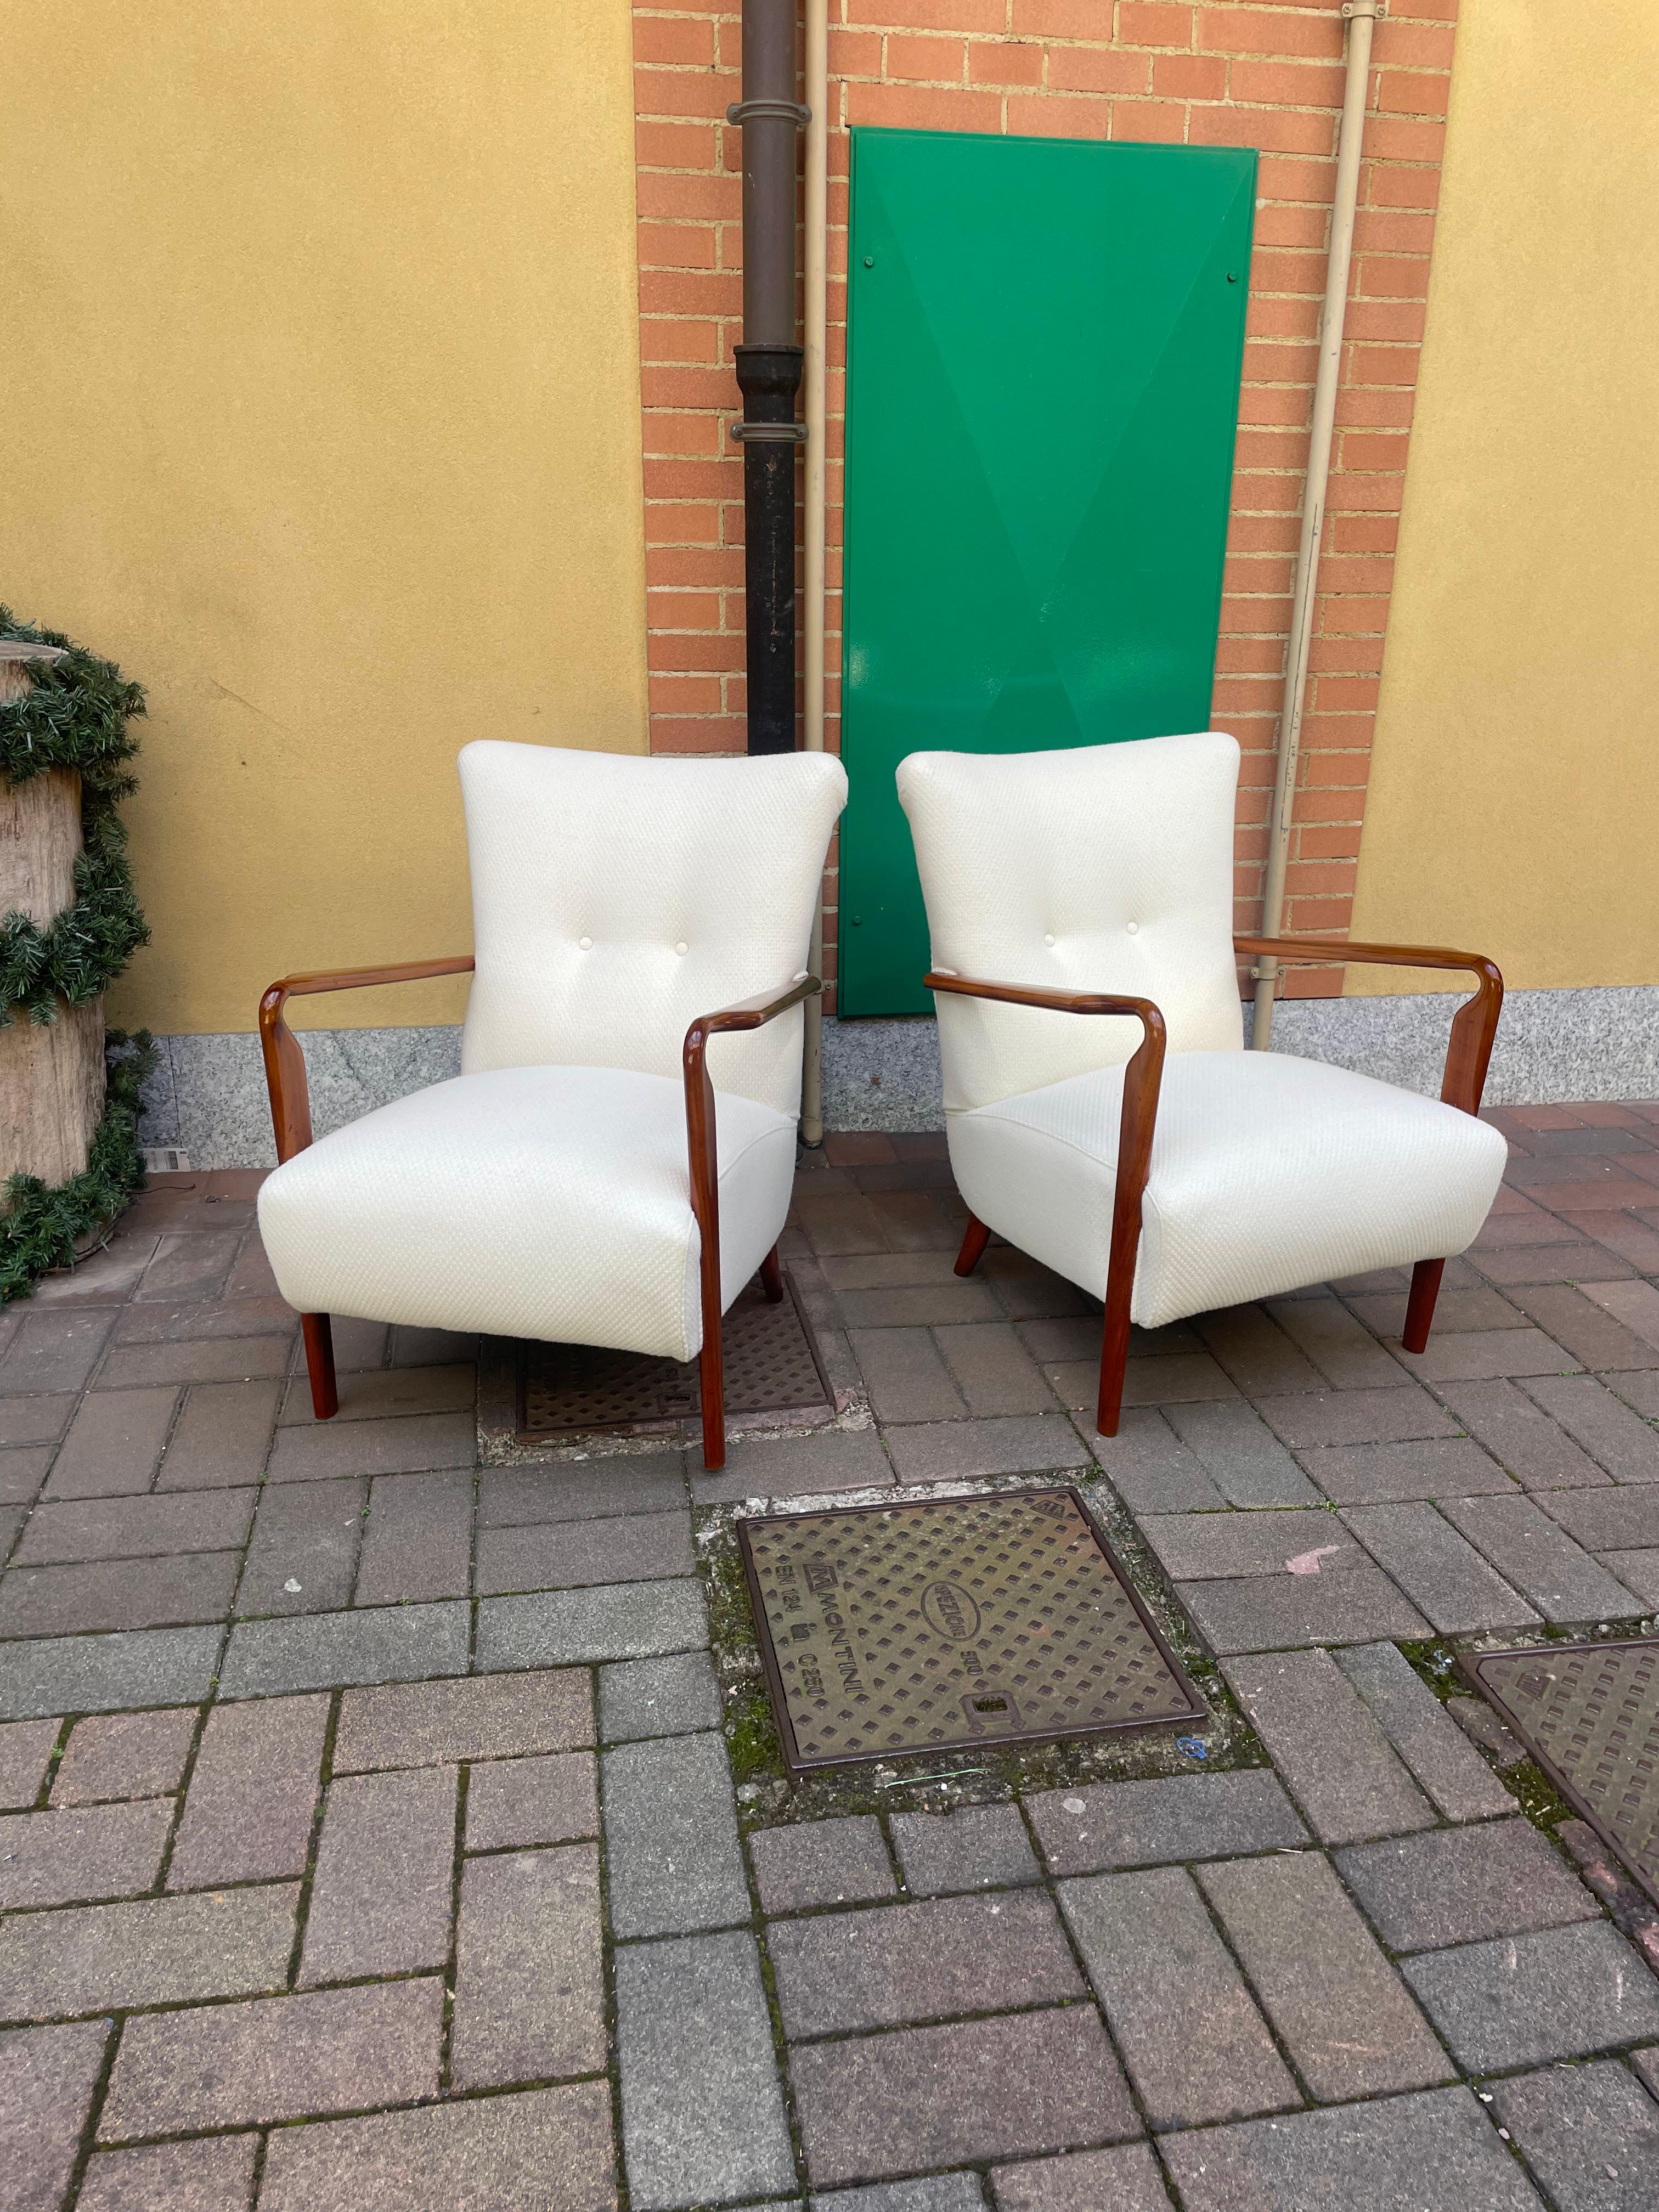 Pair of armchairs mod. 401 manufactured by Cassina dating from the late 1940s.
The armchairs are made of cherry wood and high-quality wool fabric.
They have been restored and by design and material have a very elegant style as well as being very